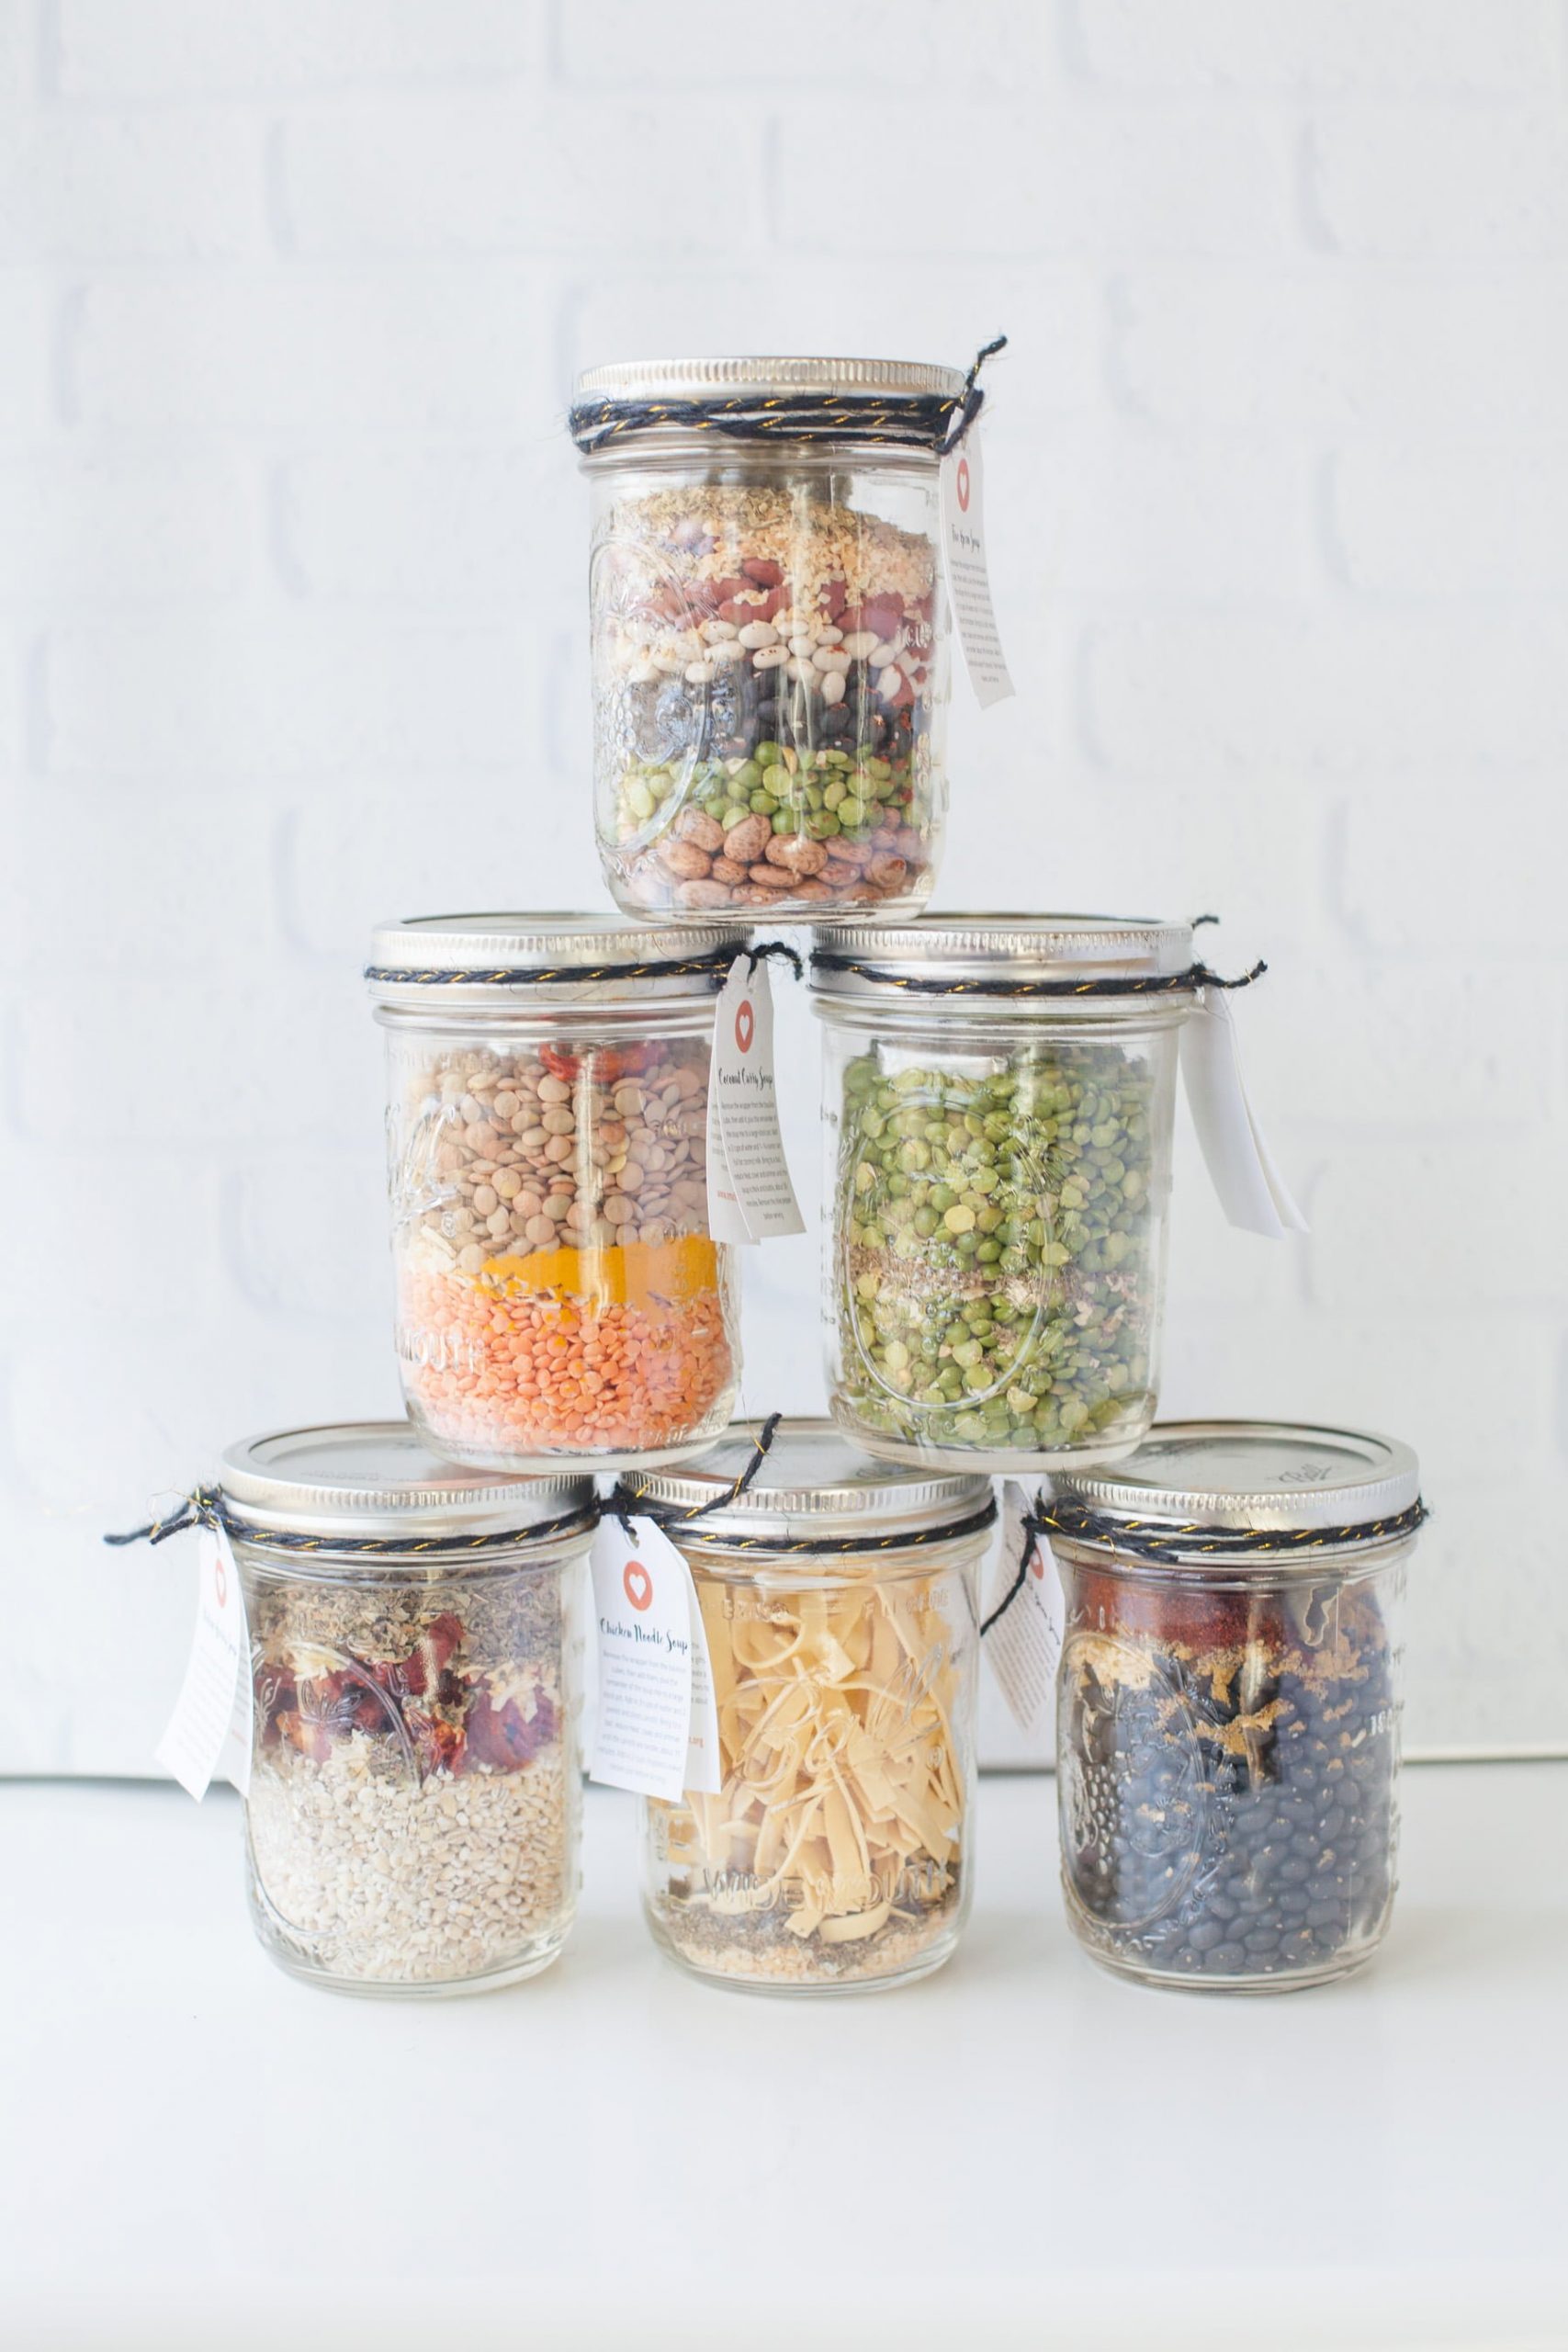 Six homemade soup mixes in jars arranged in a pyramid.